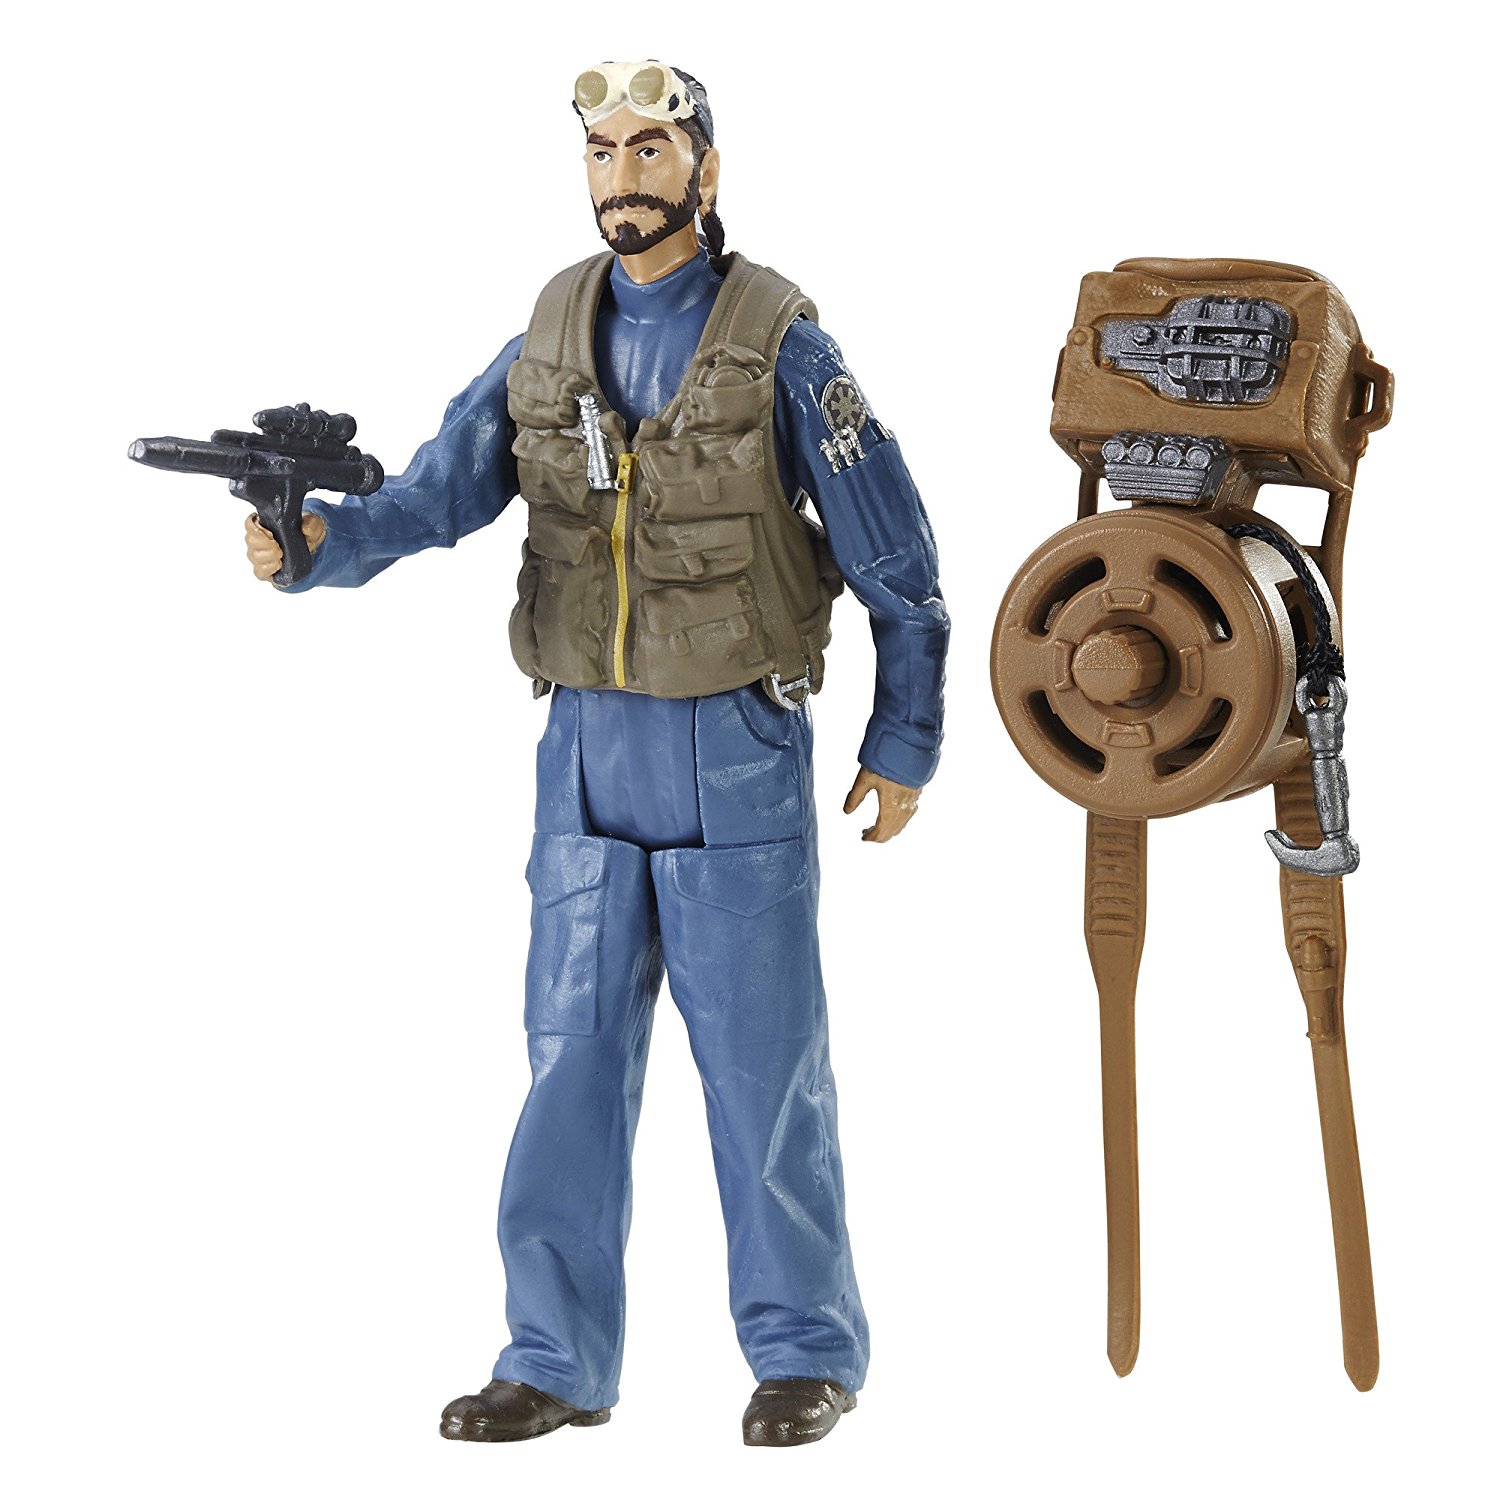 Amazon.com: Star Wars Rogue One Bodhi Rook: Toys & Games